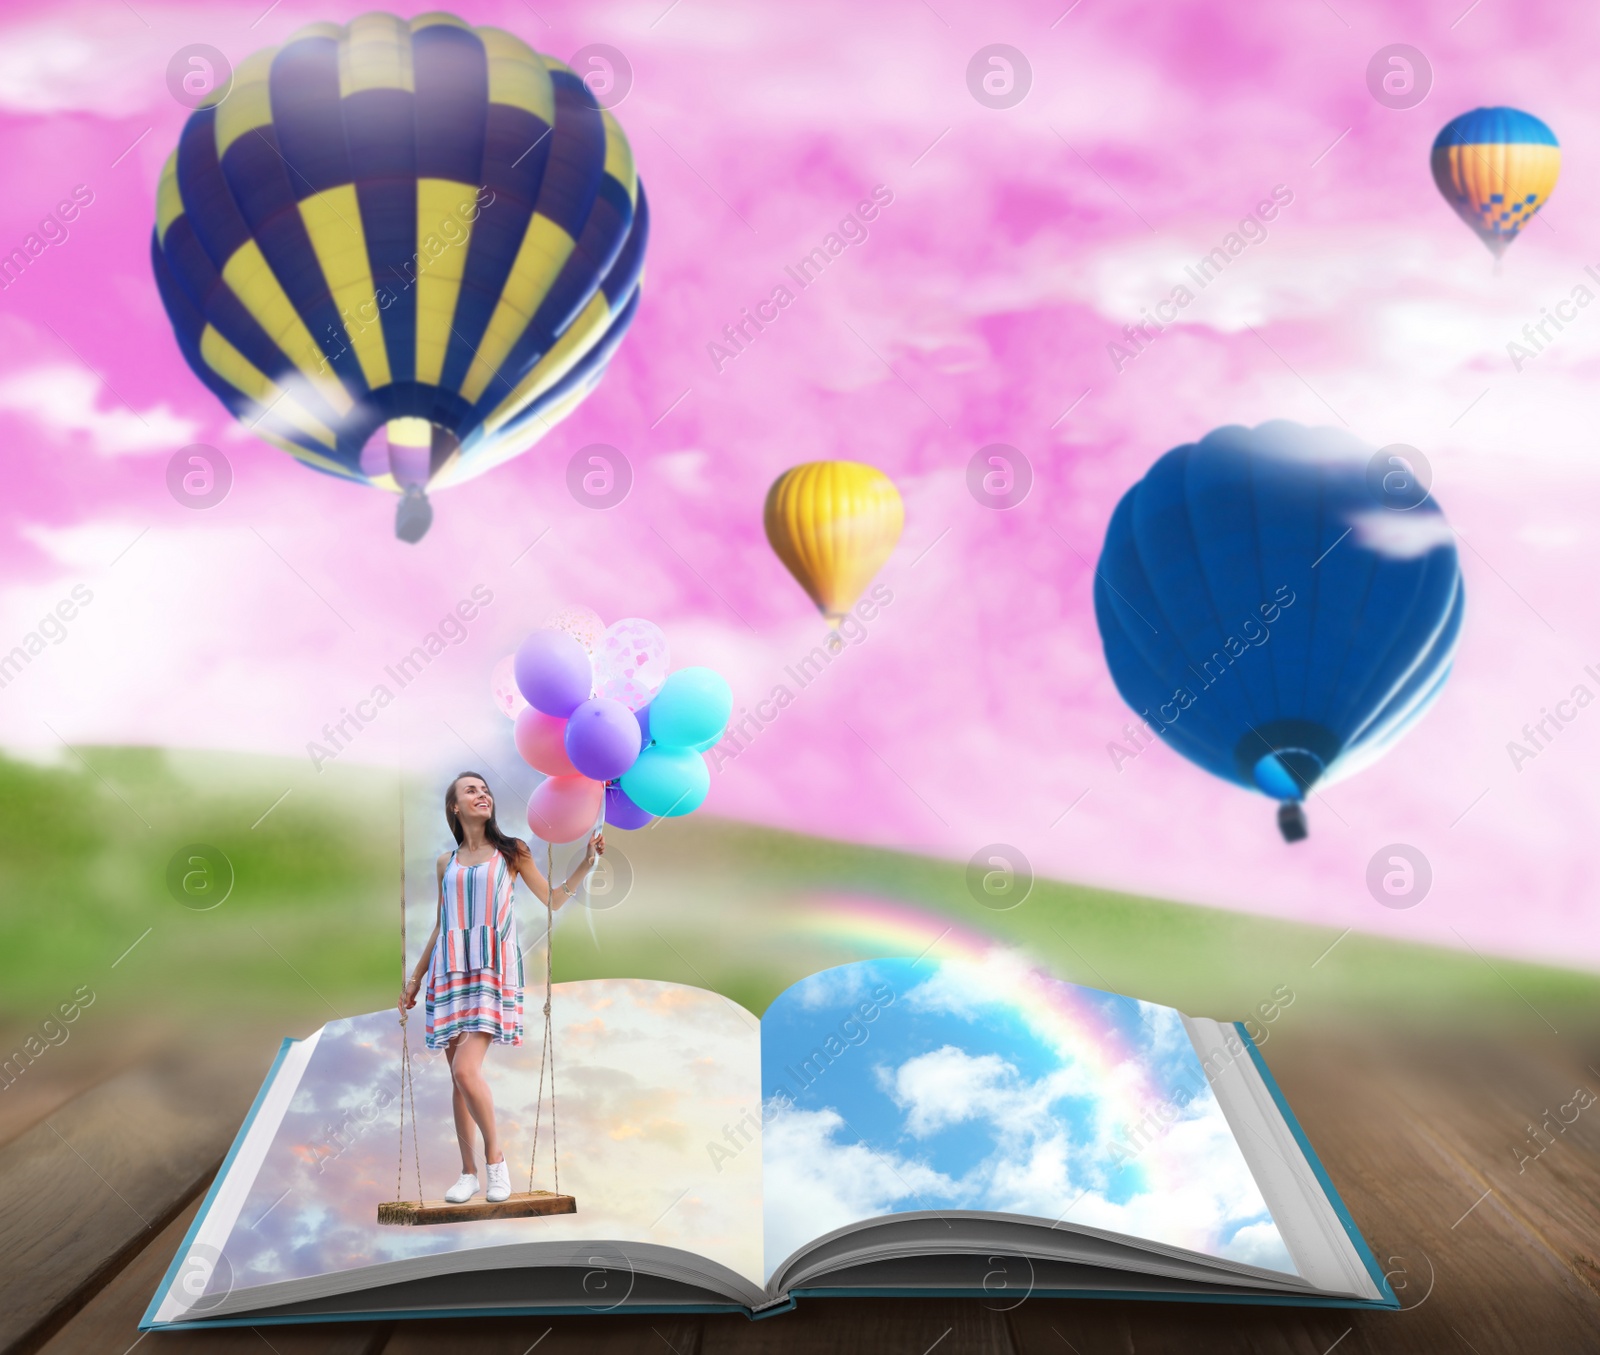 Image of Fantasy worlds in fairytales. Book, hot air balloons and pink sky over misty green meadow on background